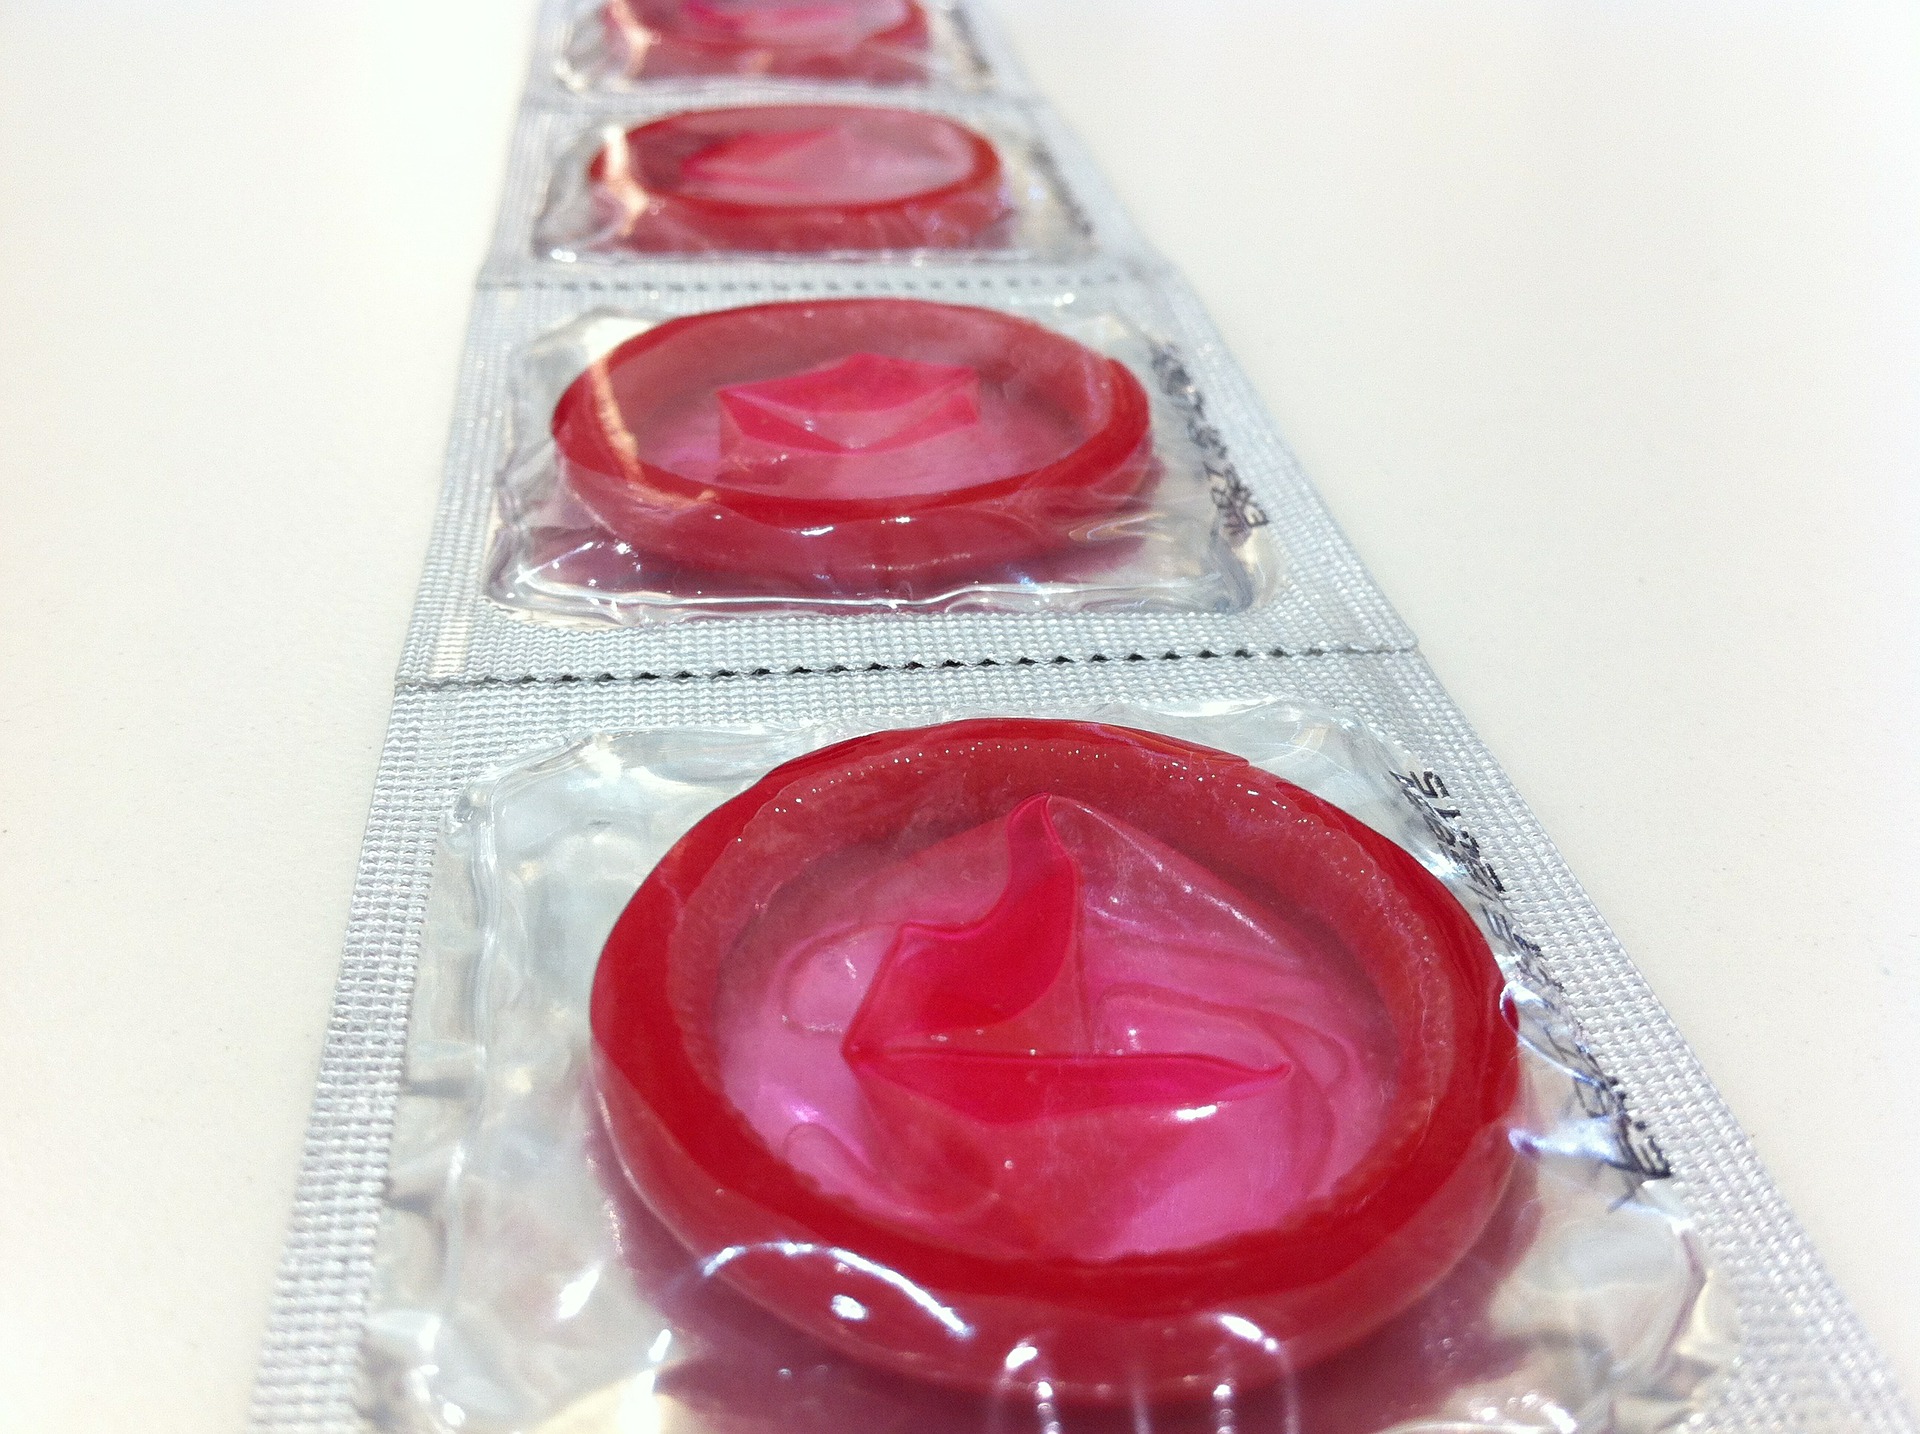 Pink condoms laid out in their wrappers